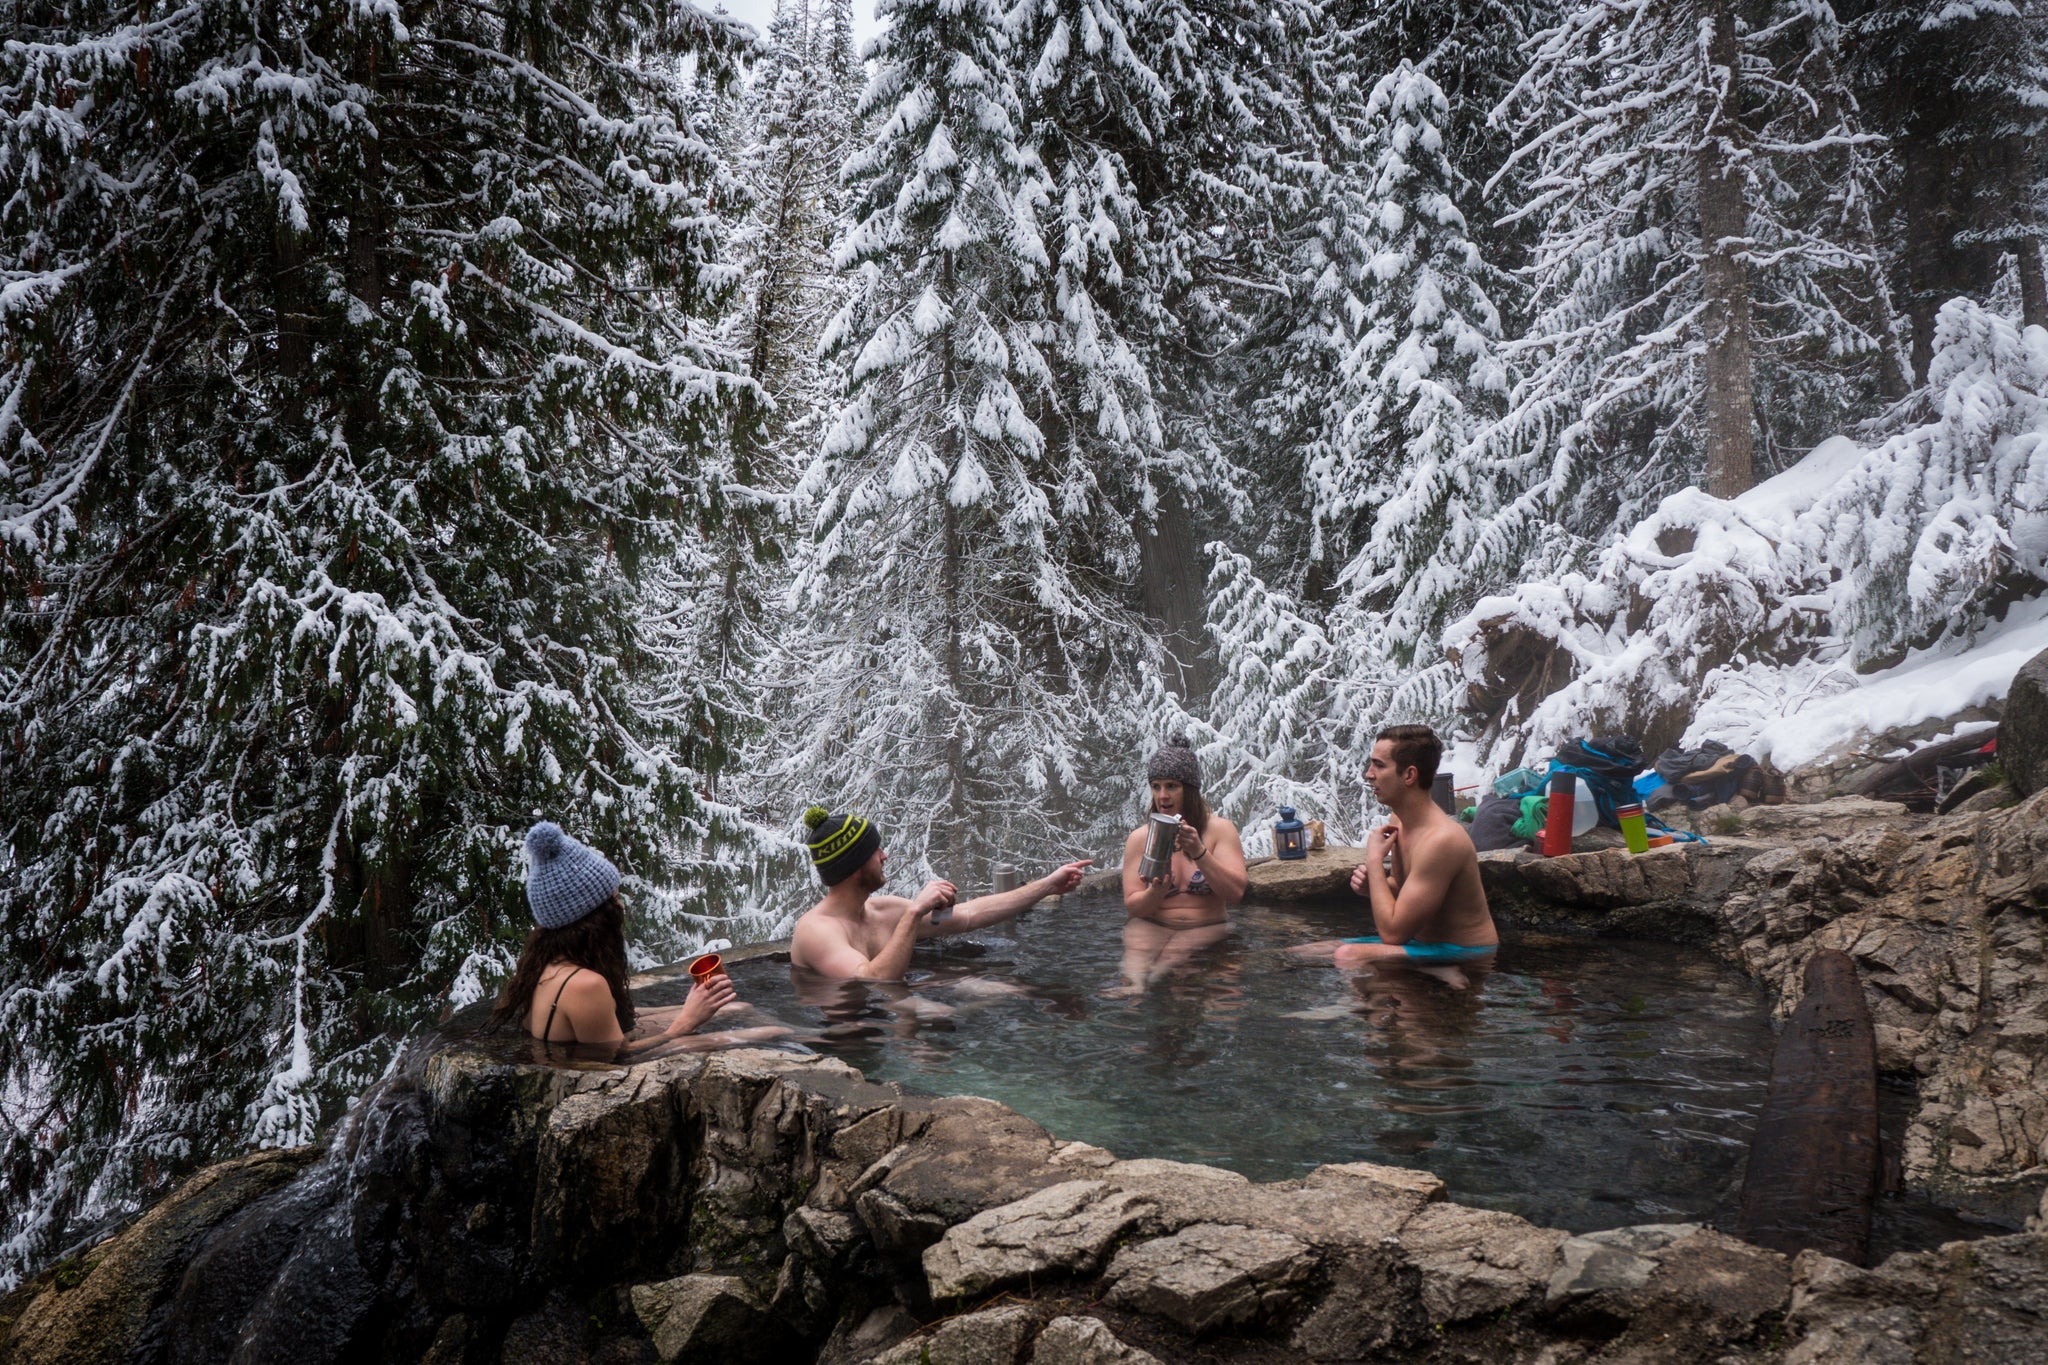 How to Spend Winter in Washington